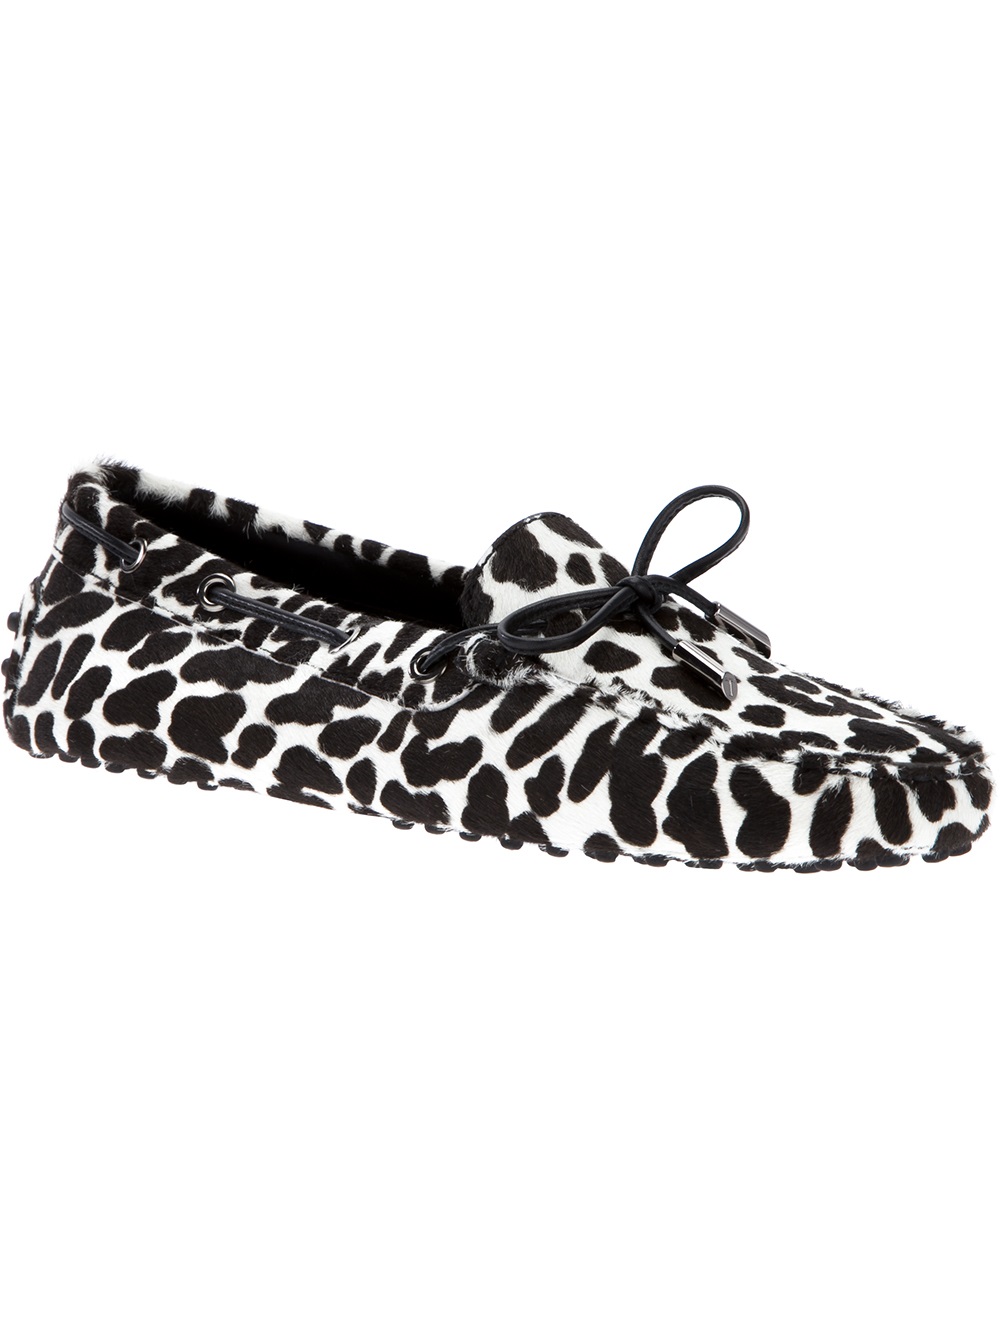 Tod's Animal Print Loafer in Black | Lyst